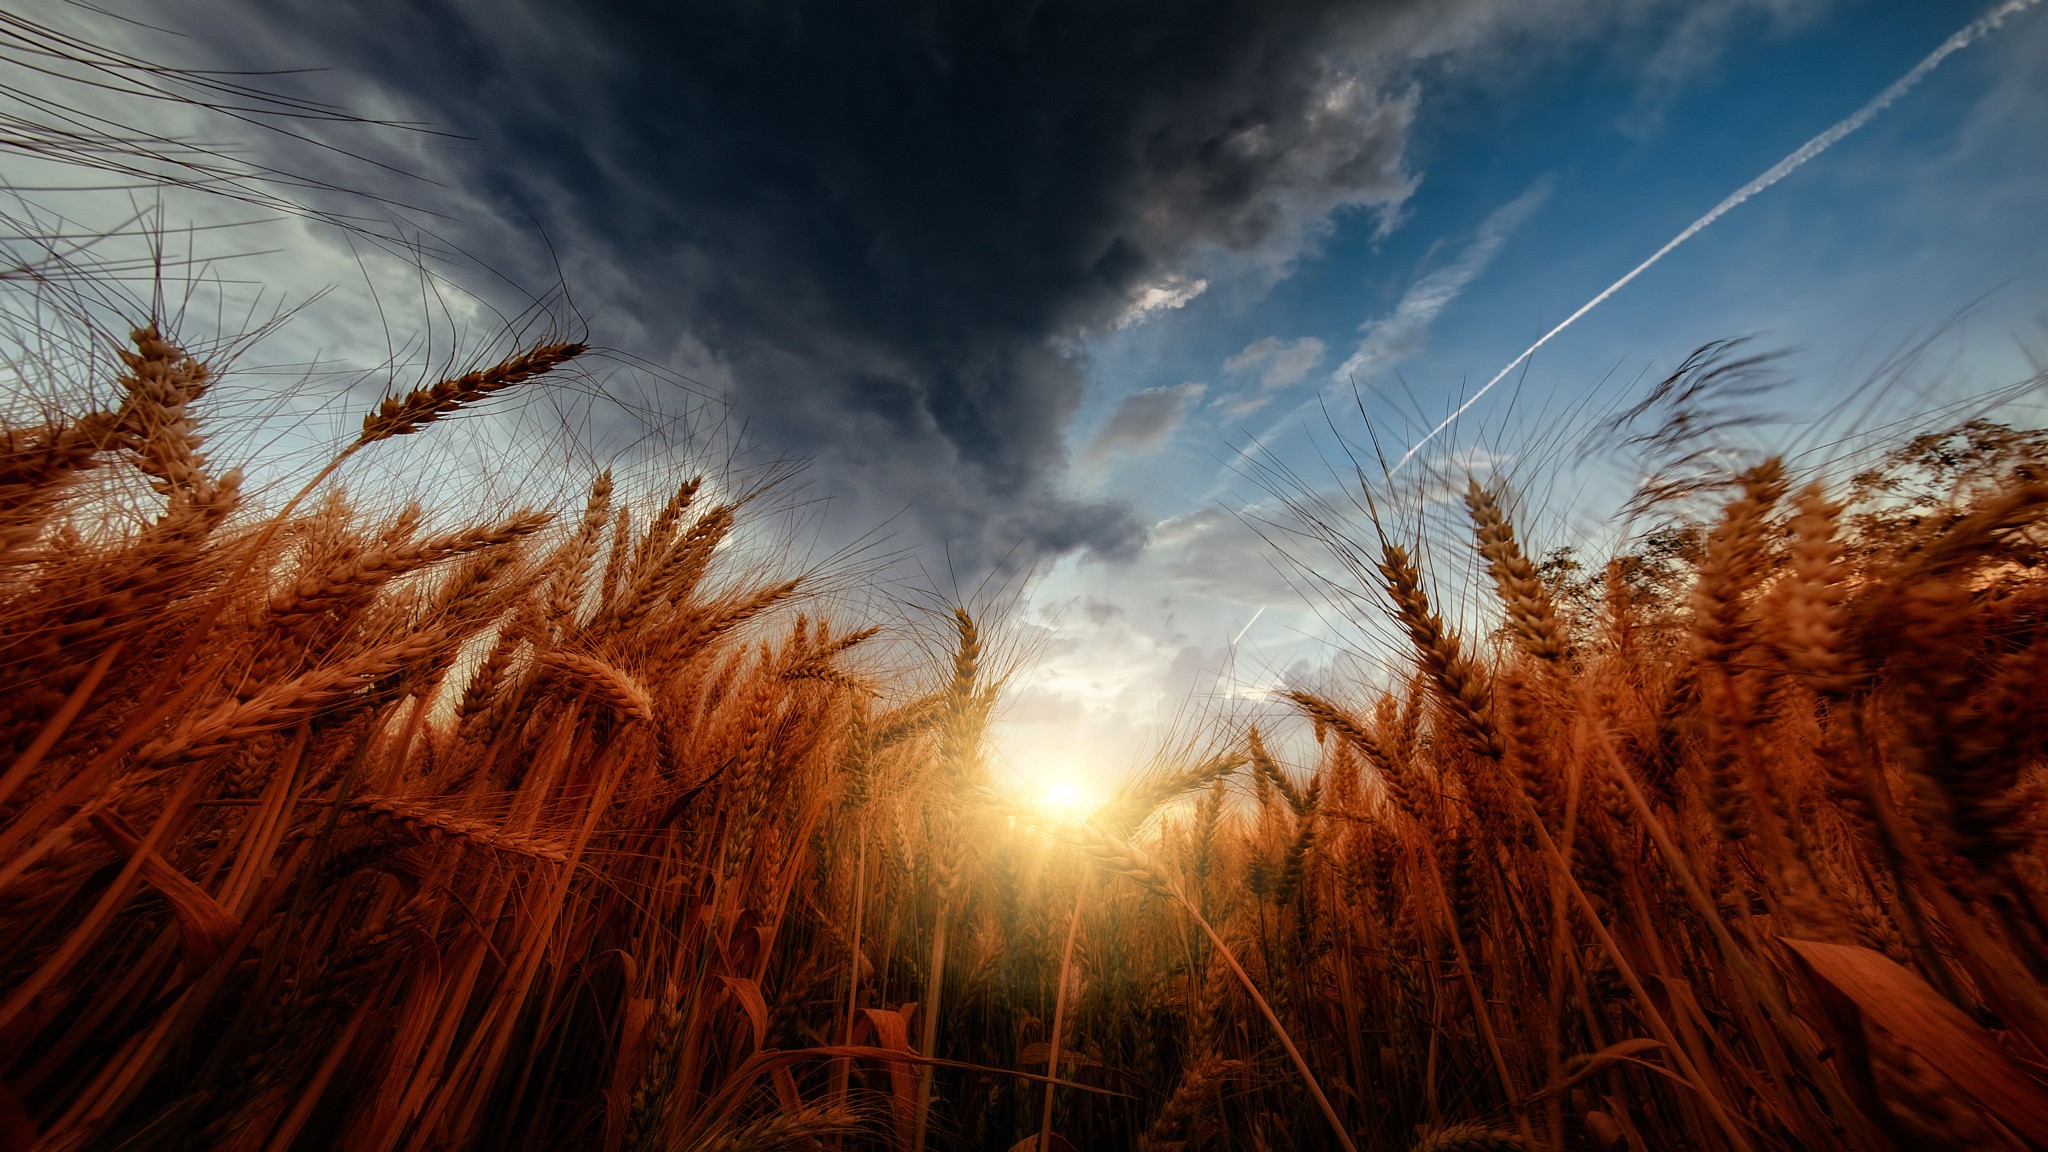 General 2048x1152 sky wheat storm sunset clouds colorful Agro (Plants) low-angle plants